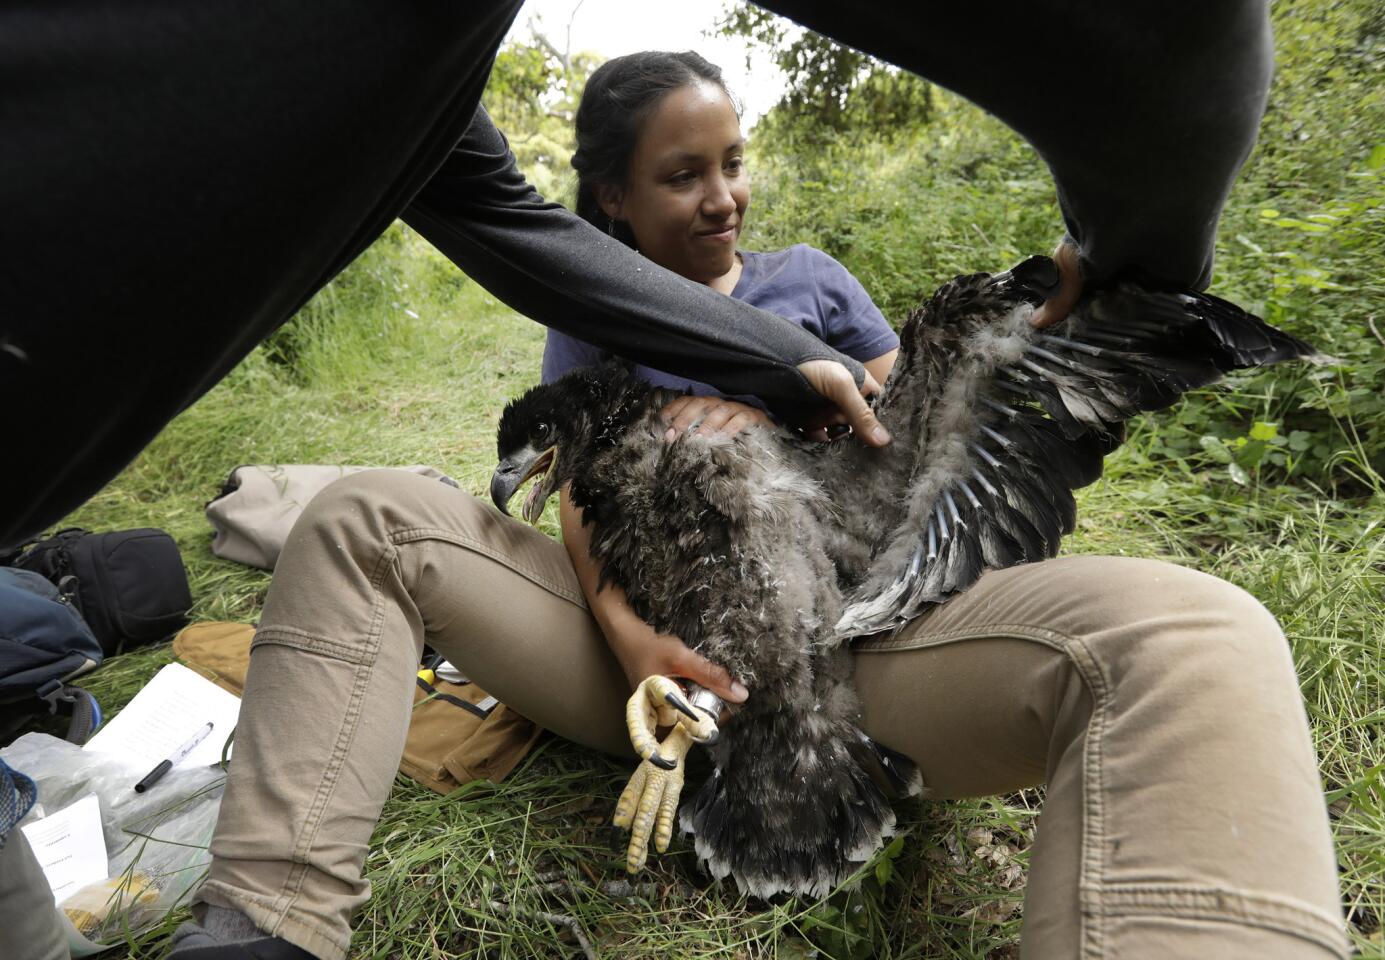 Dr. Peter Sharpe checks the wings and feathers of the eaglet as seasonal tech Laura Echávez holds him. Sharpe, a wildlife biologist, has spent years trying to restore the bald eagle to its historic habitat on the Channel Islands. Bald eagles were wiped out on the Channel Islands by the mid-1960s as a result of DDT-contaminated waste being dumped into the local waters.